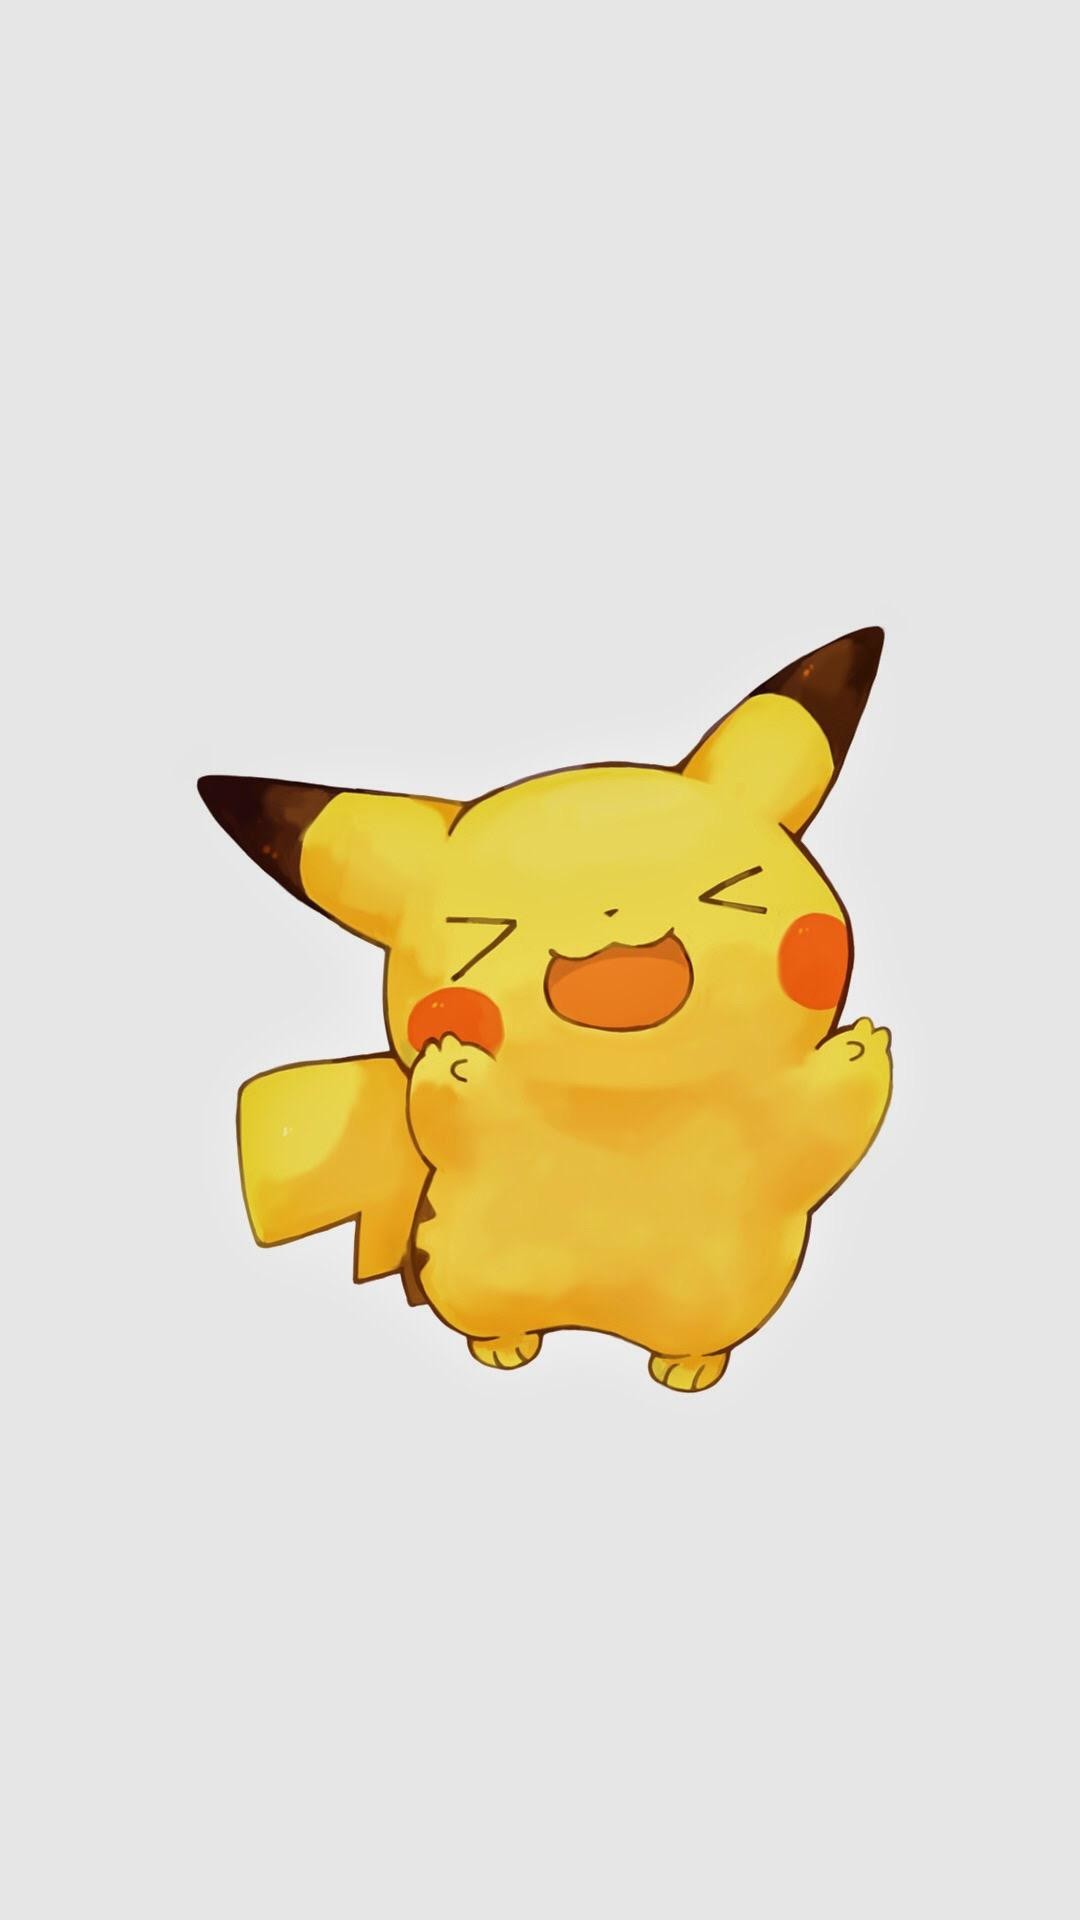 Tap image for more funny cute Pikachu Pikachu